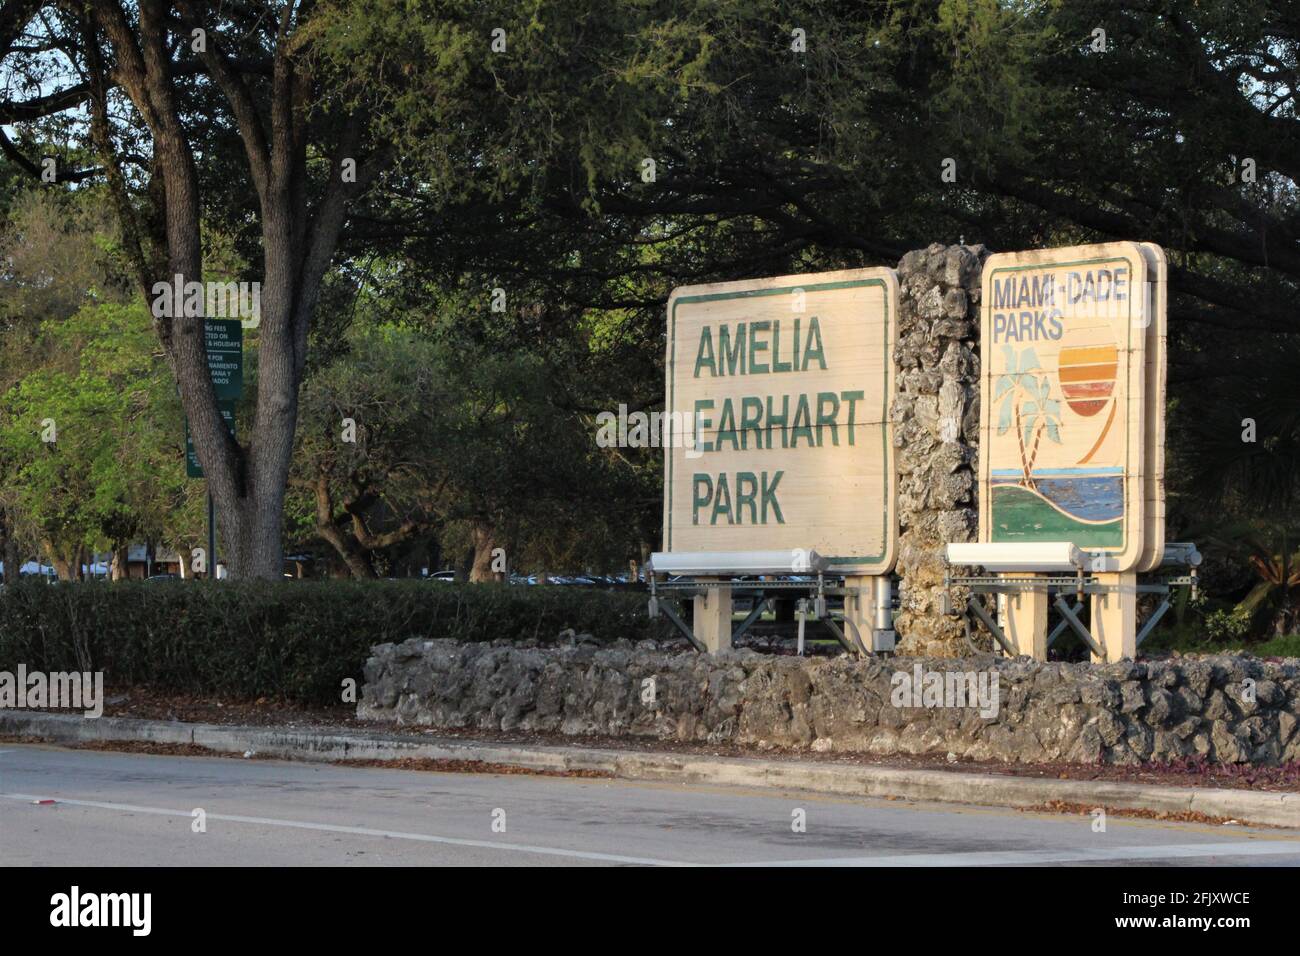 Entrance sign for Amelia Earhart Park in Miami Dade County in Hialeah, florida Stock Photo